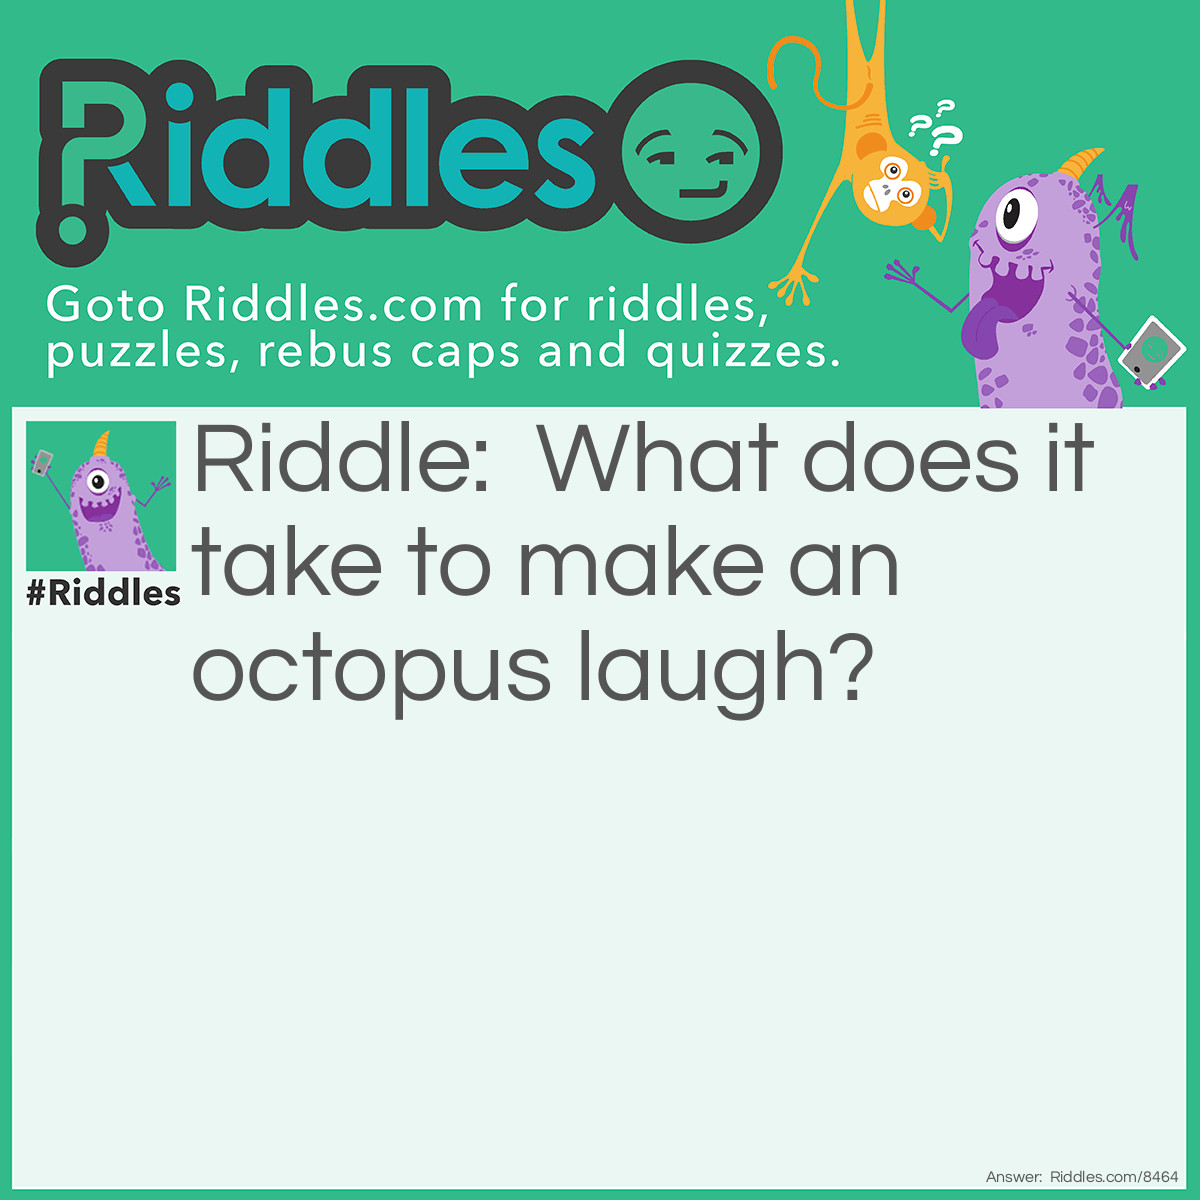 Riddle: What does it take to make an octopus <a title="laugh" href="../../../funny-riddles">laugh</a>? Answer: Ten tickles.